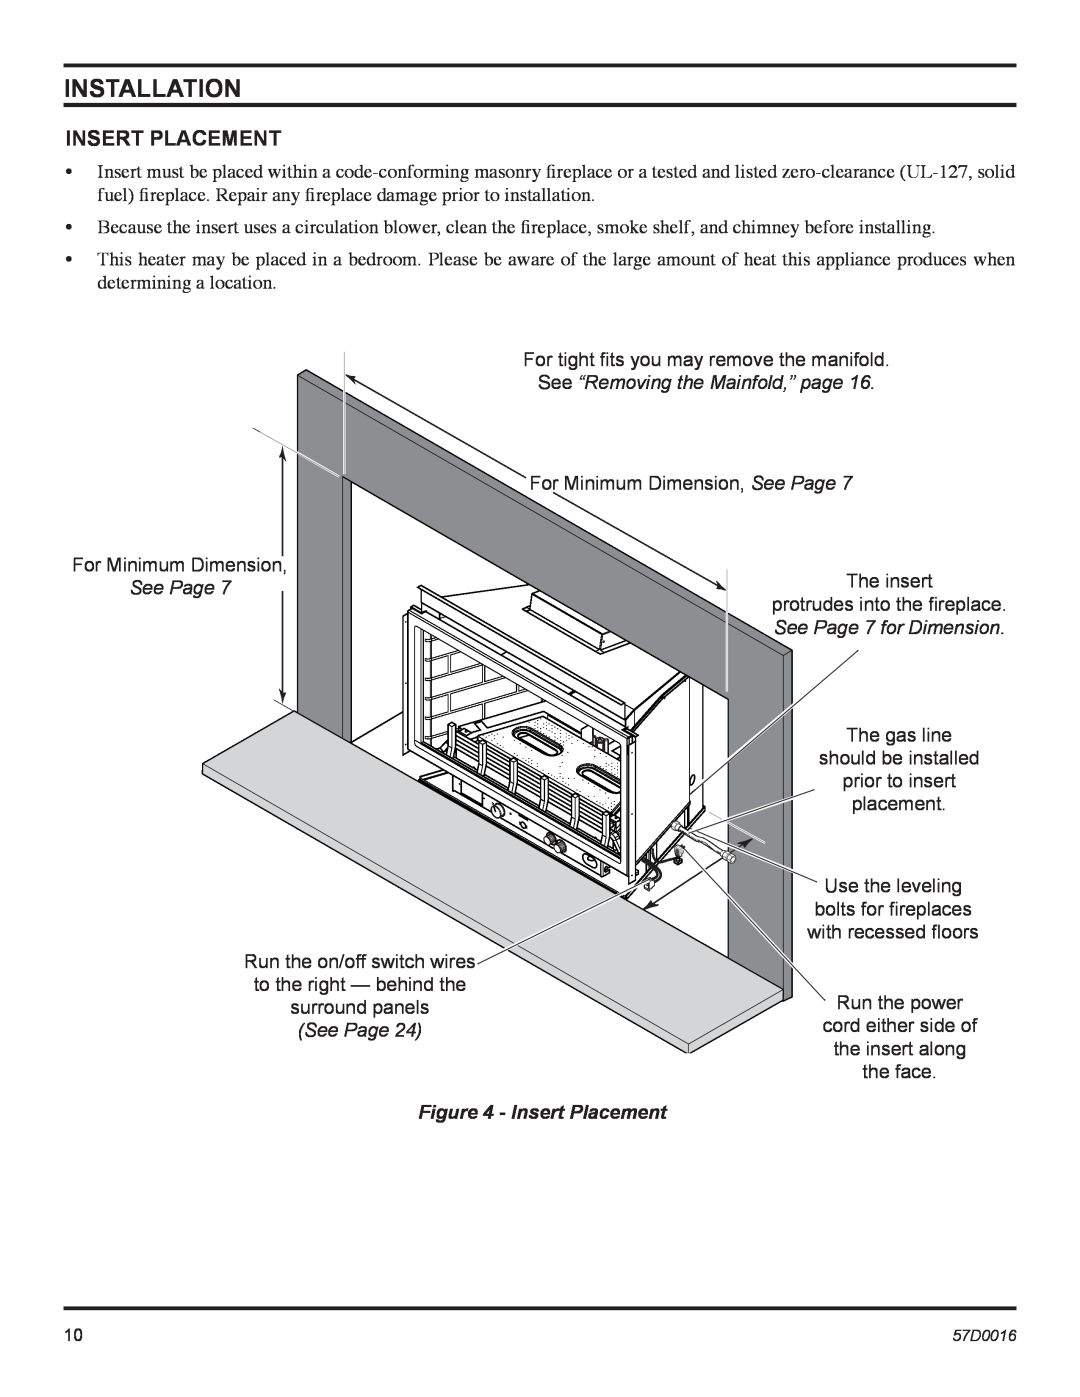 Monessen Hearth IDV380NVC, IDV490NVC, IDV490PVC Insert Placement, Installation, See “Removing the Mainfold,” page, See Page 